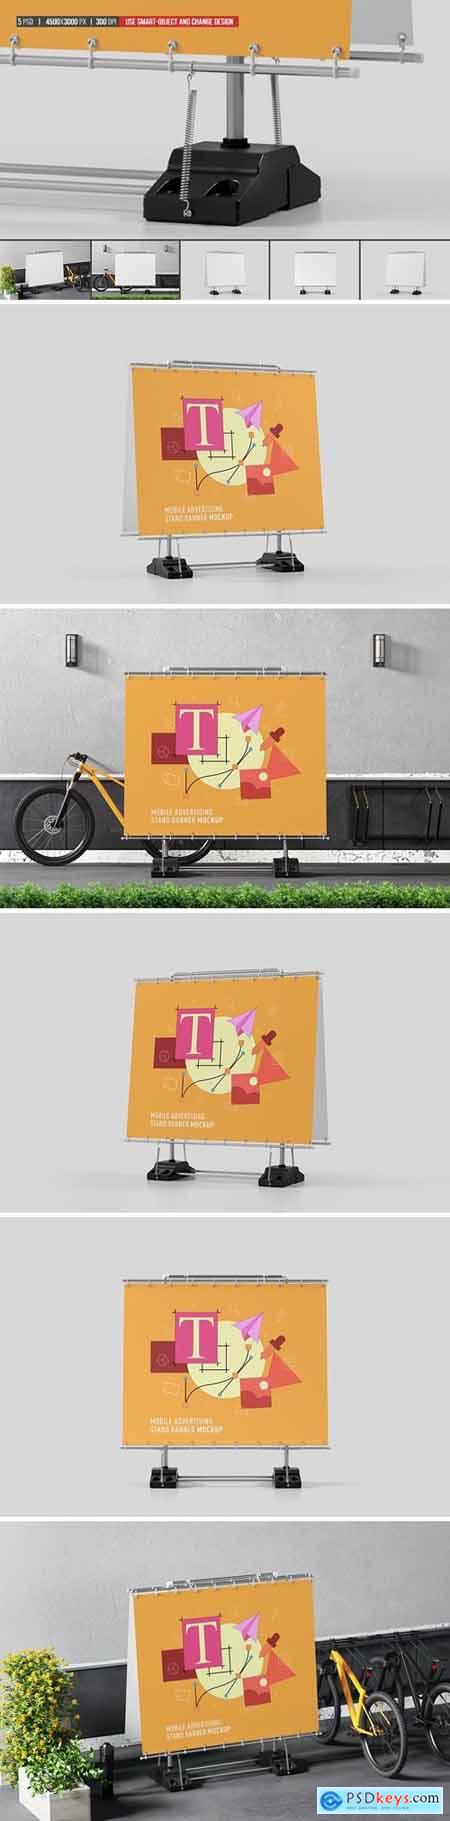 Mobile Advertising Stand Banner Mockup